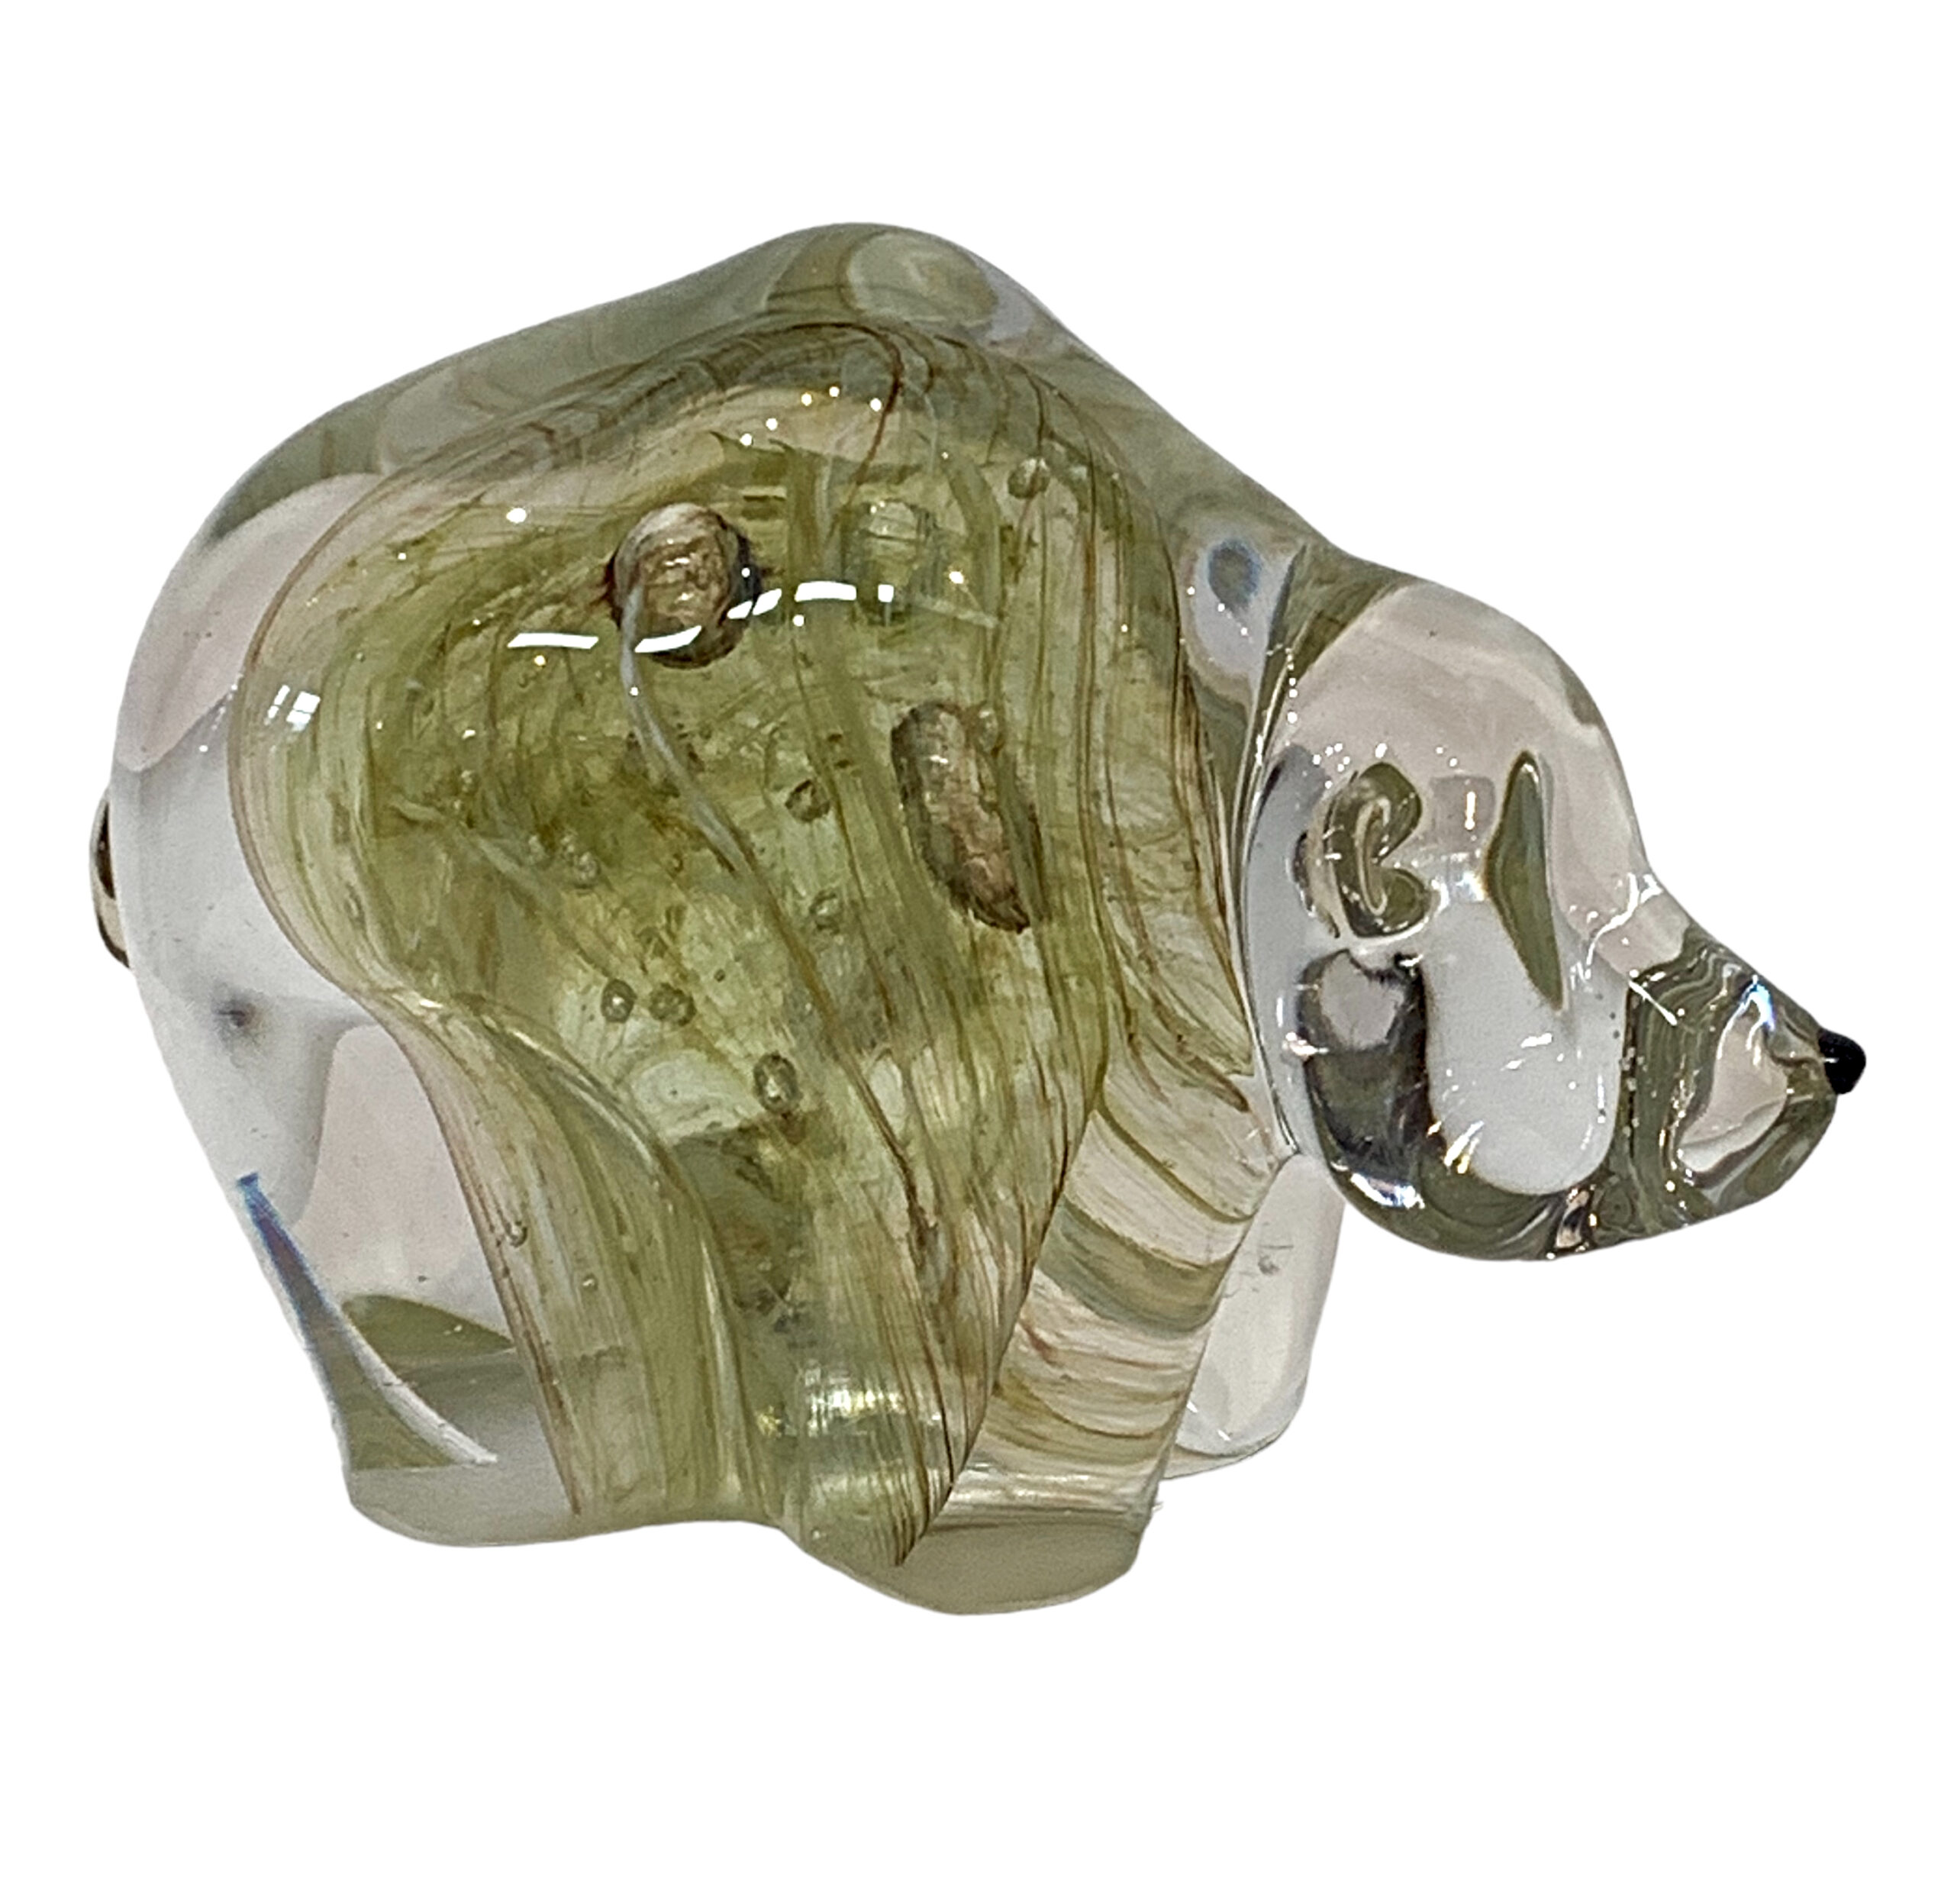 One of a kind blown glass grizzly bear sculpture by Hayden MacRae at Effusion Art Gallery in Invermere, BC